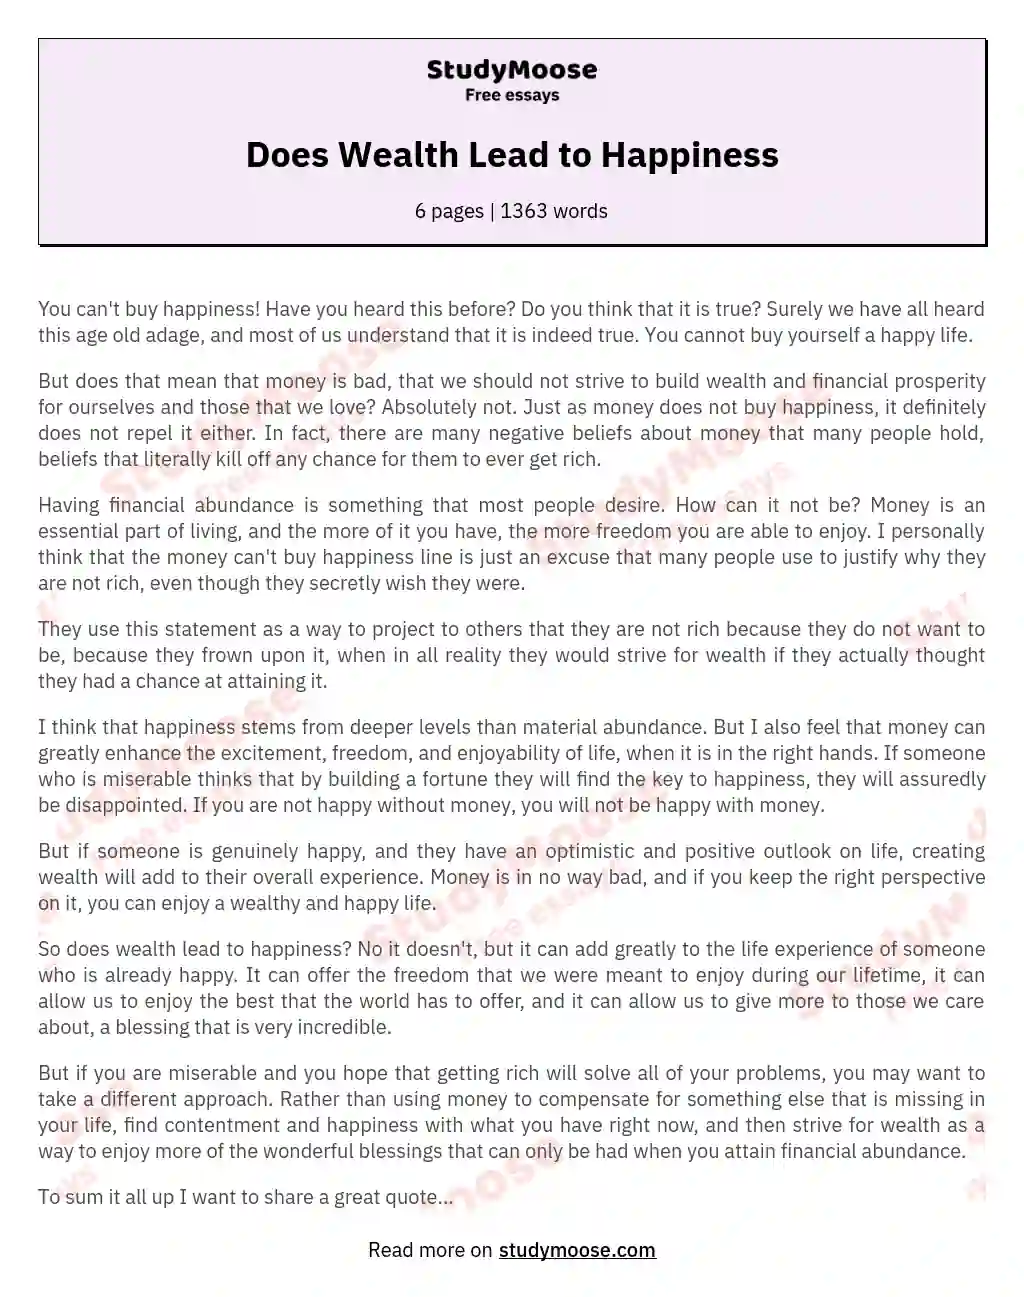 essay about money and wealth